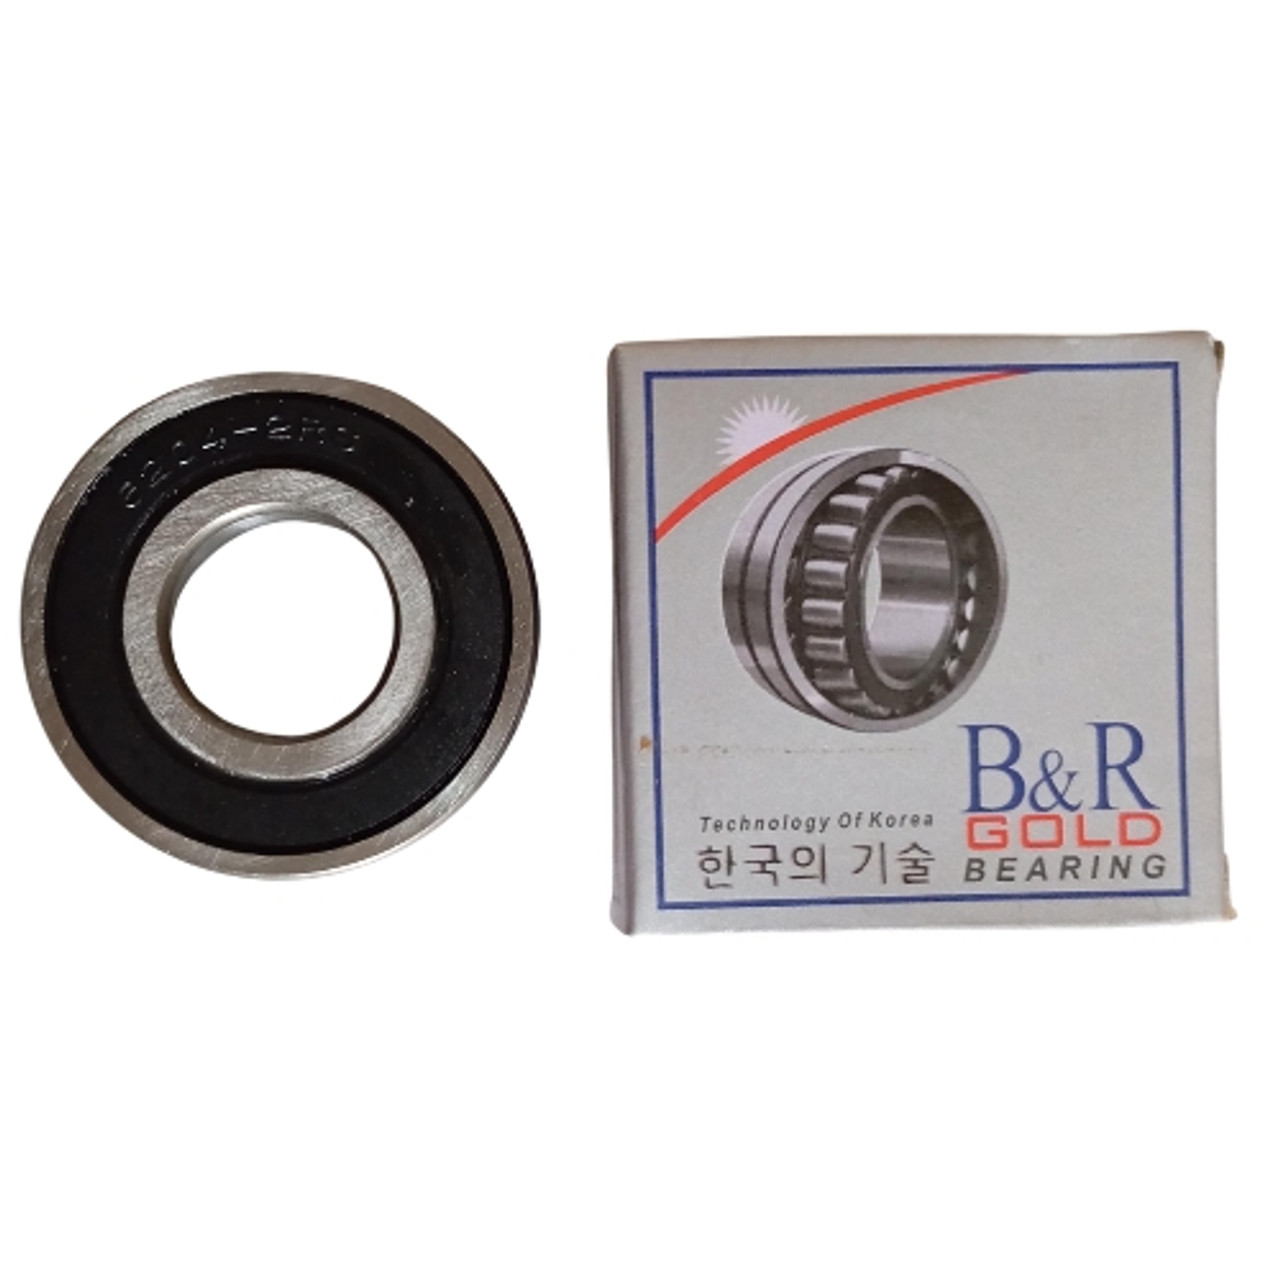 B&R Gold Deep Groove Ball Bearing 6204-2RS Generic,
Inside Diameter: 20mm 
Outside Diameter: 47mm 
Width: 14mm 
Seal Type: Rubber seal on both sides